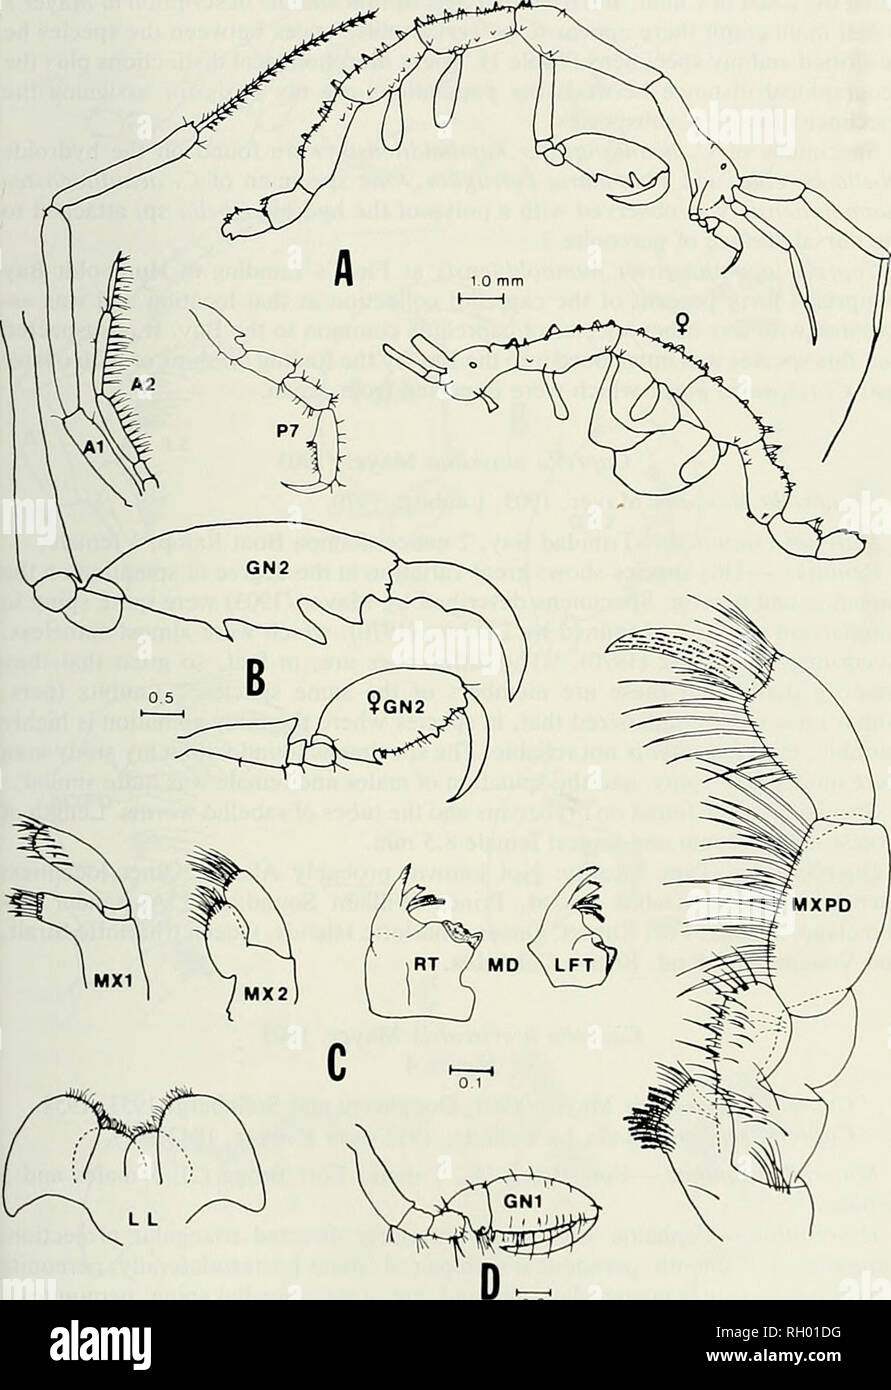 . Bulletin. Science; Natural history; Natural history. CAPRELLID AMPHIPODS FROM NORTHERN CALIFORNIA 155. 0 2 Fig. 3. Ciiprcllii iivaiillu&gt;i;ii.sicr luimliitUllUnsis: A. Male iiml I'cni.ilc. hilci.il icu; appendages, antenna I. antenna 2. and pereopod 7; B. Male gnathopud 2 and female gnathopod 2; C. Male mouth- parts; D. Male gnathopod I: measurements are in millimeters. Key to figure symbols: .A = antenna; GN = gnathopod; LET = left: LL = lower lip; MD = mandible; MX = maxilla; MXPD = ma.illiped; P = pereopod; and RT = right.. Please note that these images are extracted from scanned page Stock Photo